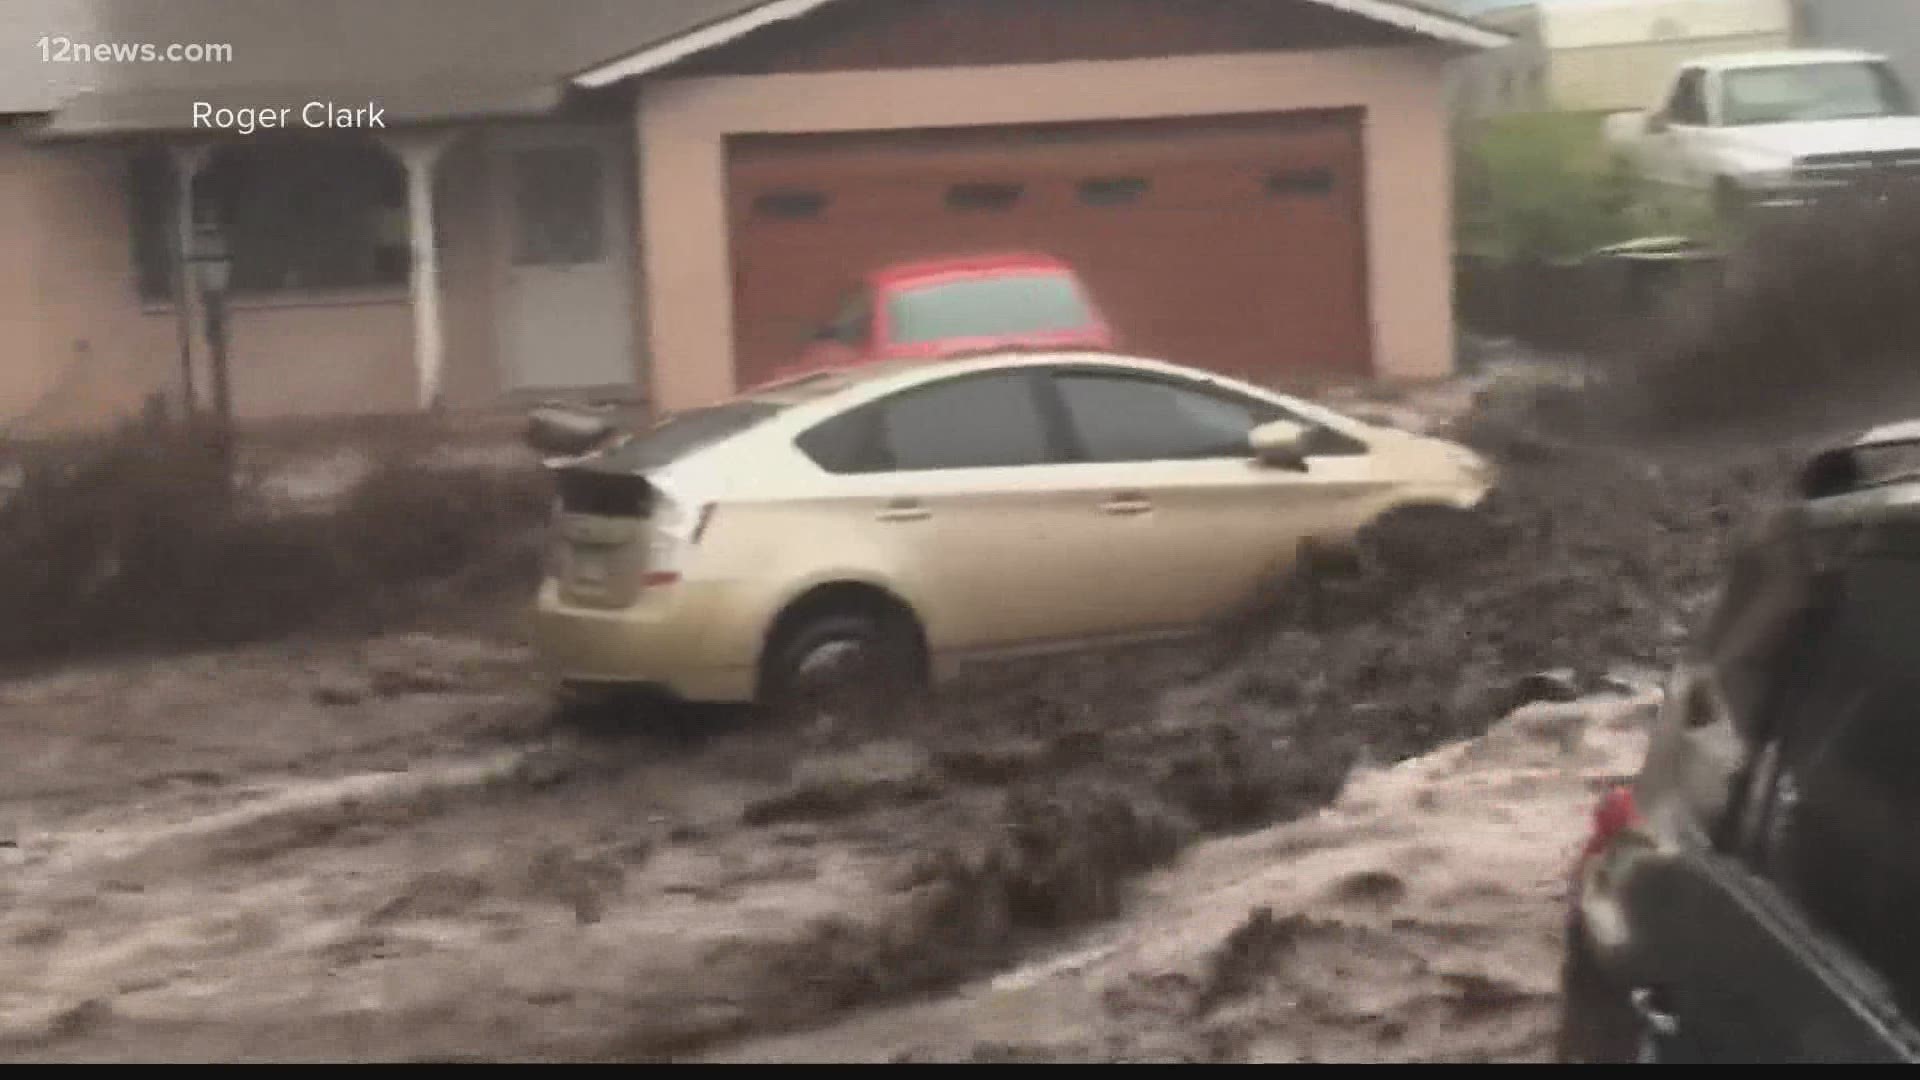 Monsoon rain in Flagstaff has left some people dealing with muddy floodwaters flowing into their homes. One person's car was even carried away by the rush of water.